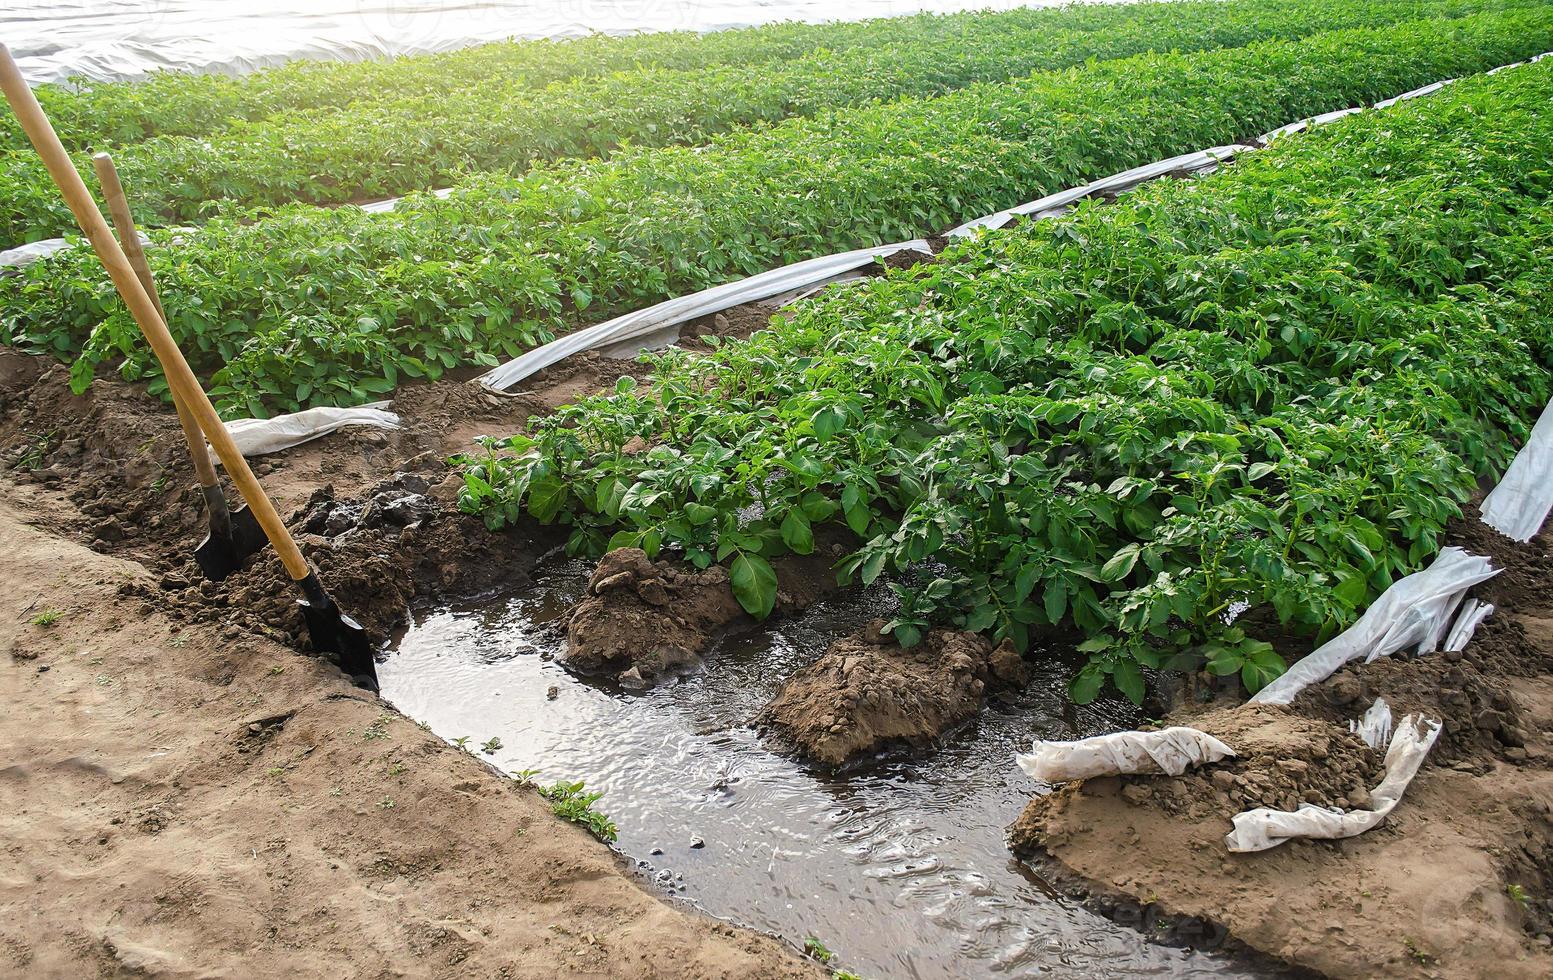 Furrow irrigation of potato plantations. Irrigation system to a farm field. Agriculture industry. Clean water resources in farming. Growing crops in arid regions. Agronomy and horticulture photo